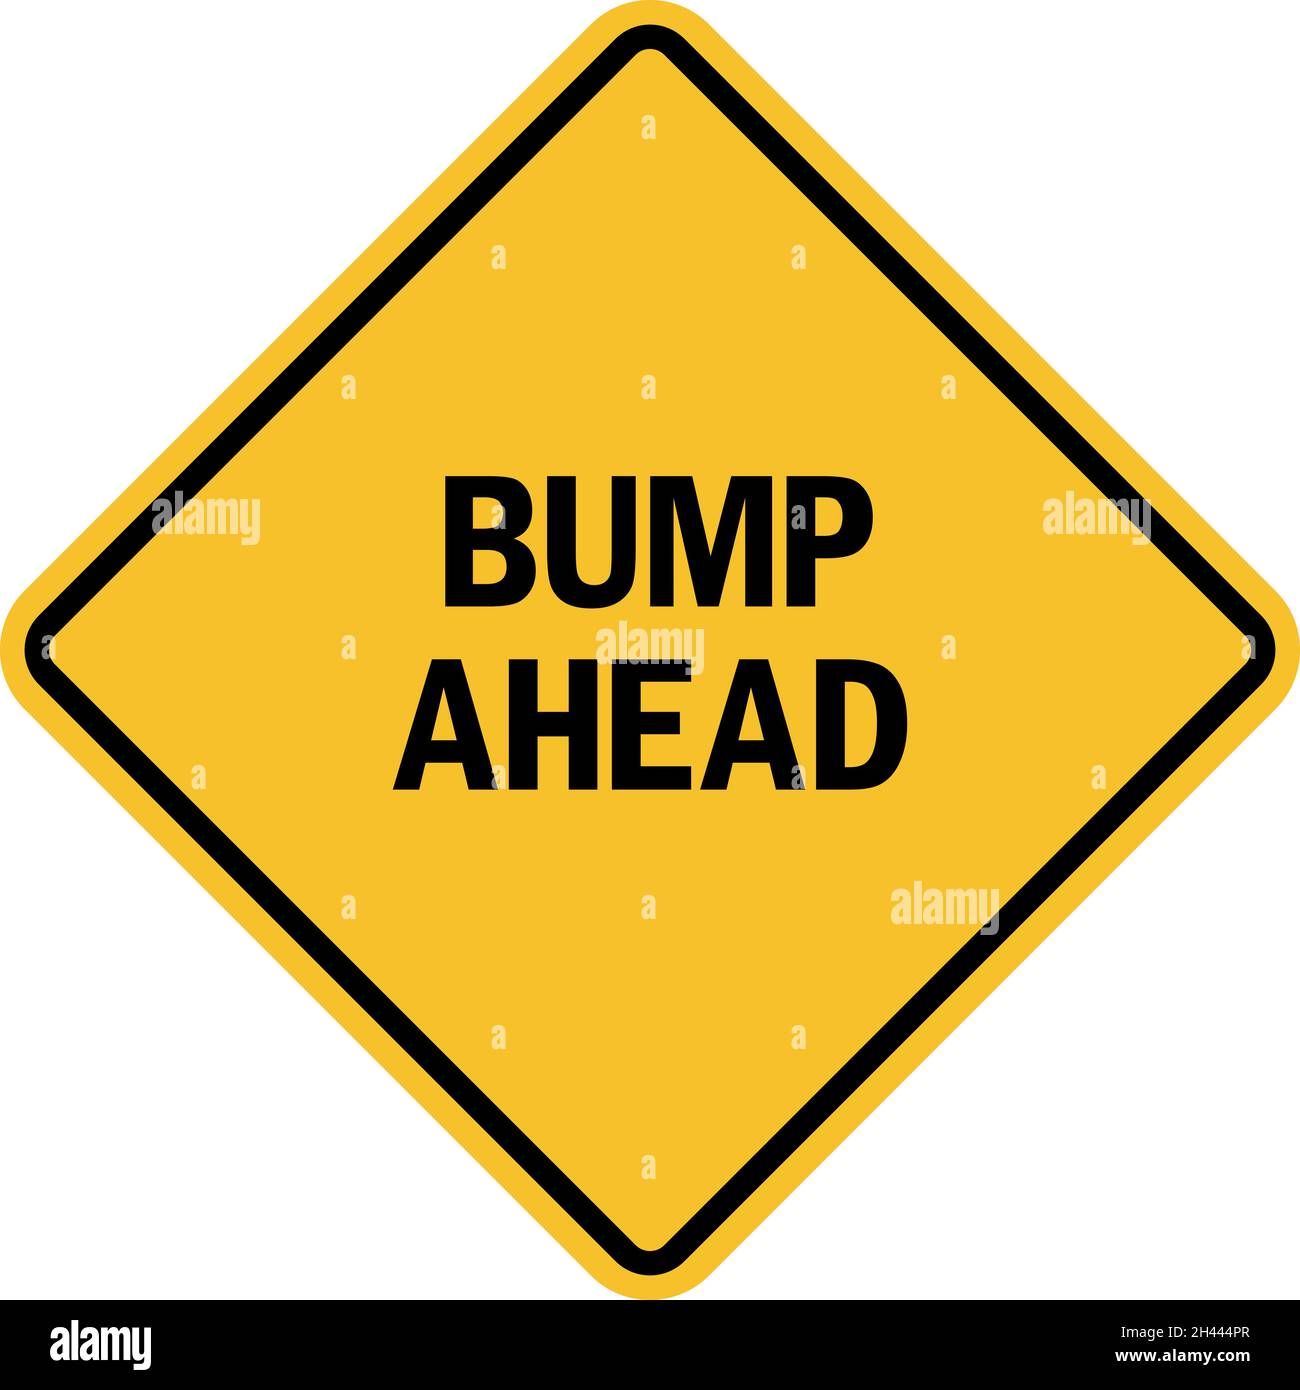 Bump ahead sign. Black on yellow diamond background. Traffic signs and symbols. Stock Vector